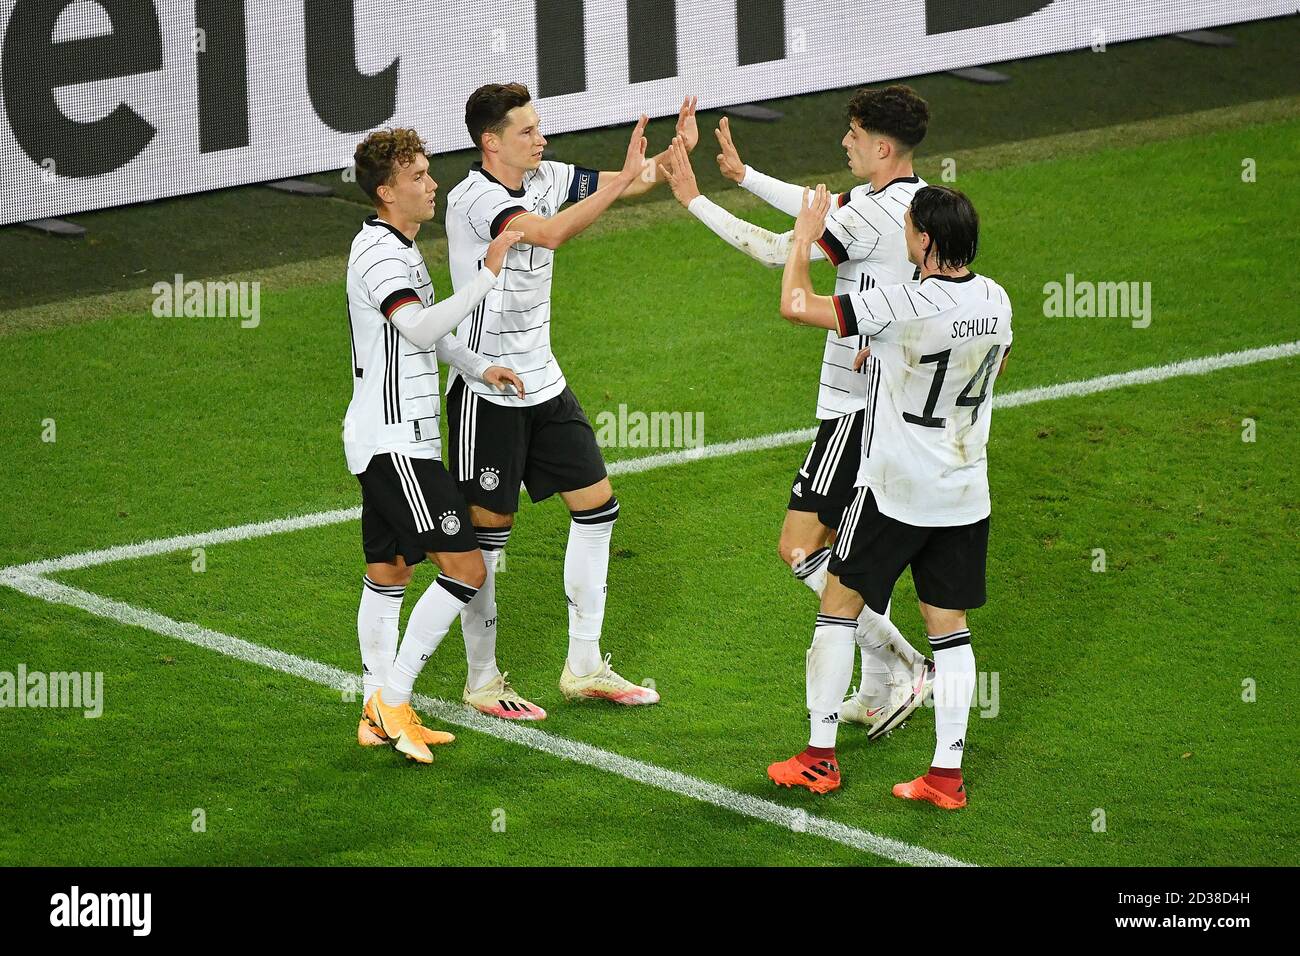 Cologne, Germany. 7th Oct, 2020. Julian Draxler (2nd L) of Germany celebrates scoring with his teammates during a football friendly match between Germany and Turkey in Cologne, Germany, Oct. 7, 2020. Credit: Ulrich Hufnagel/Xinhua/Alamy Live News Stock Photo